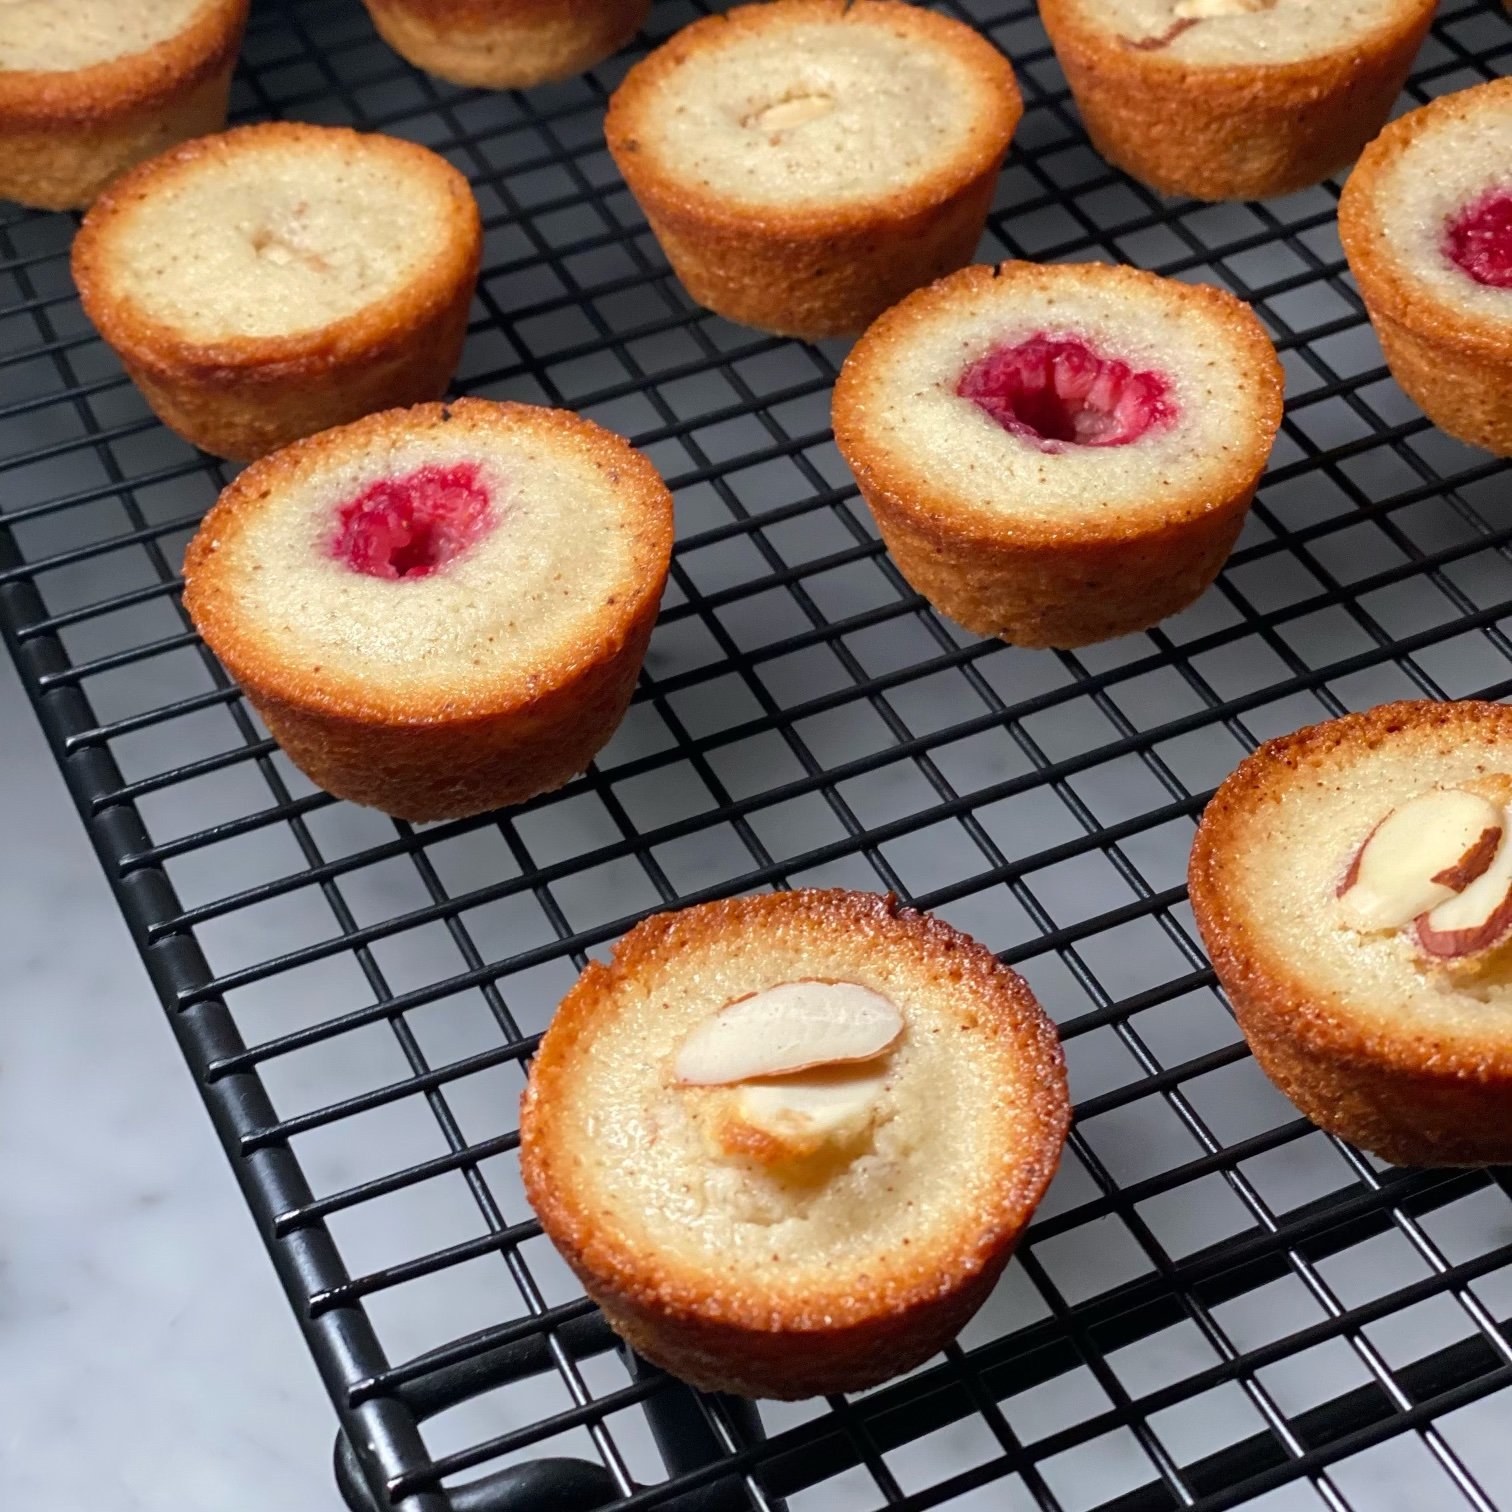 Financiers topped with Raspberries or Almond Slices $22.50/dozen